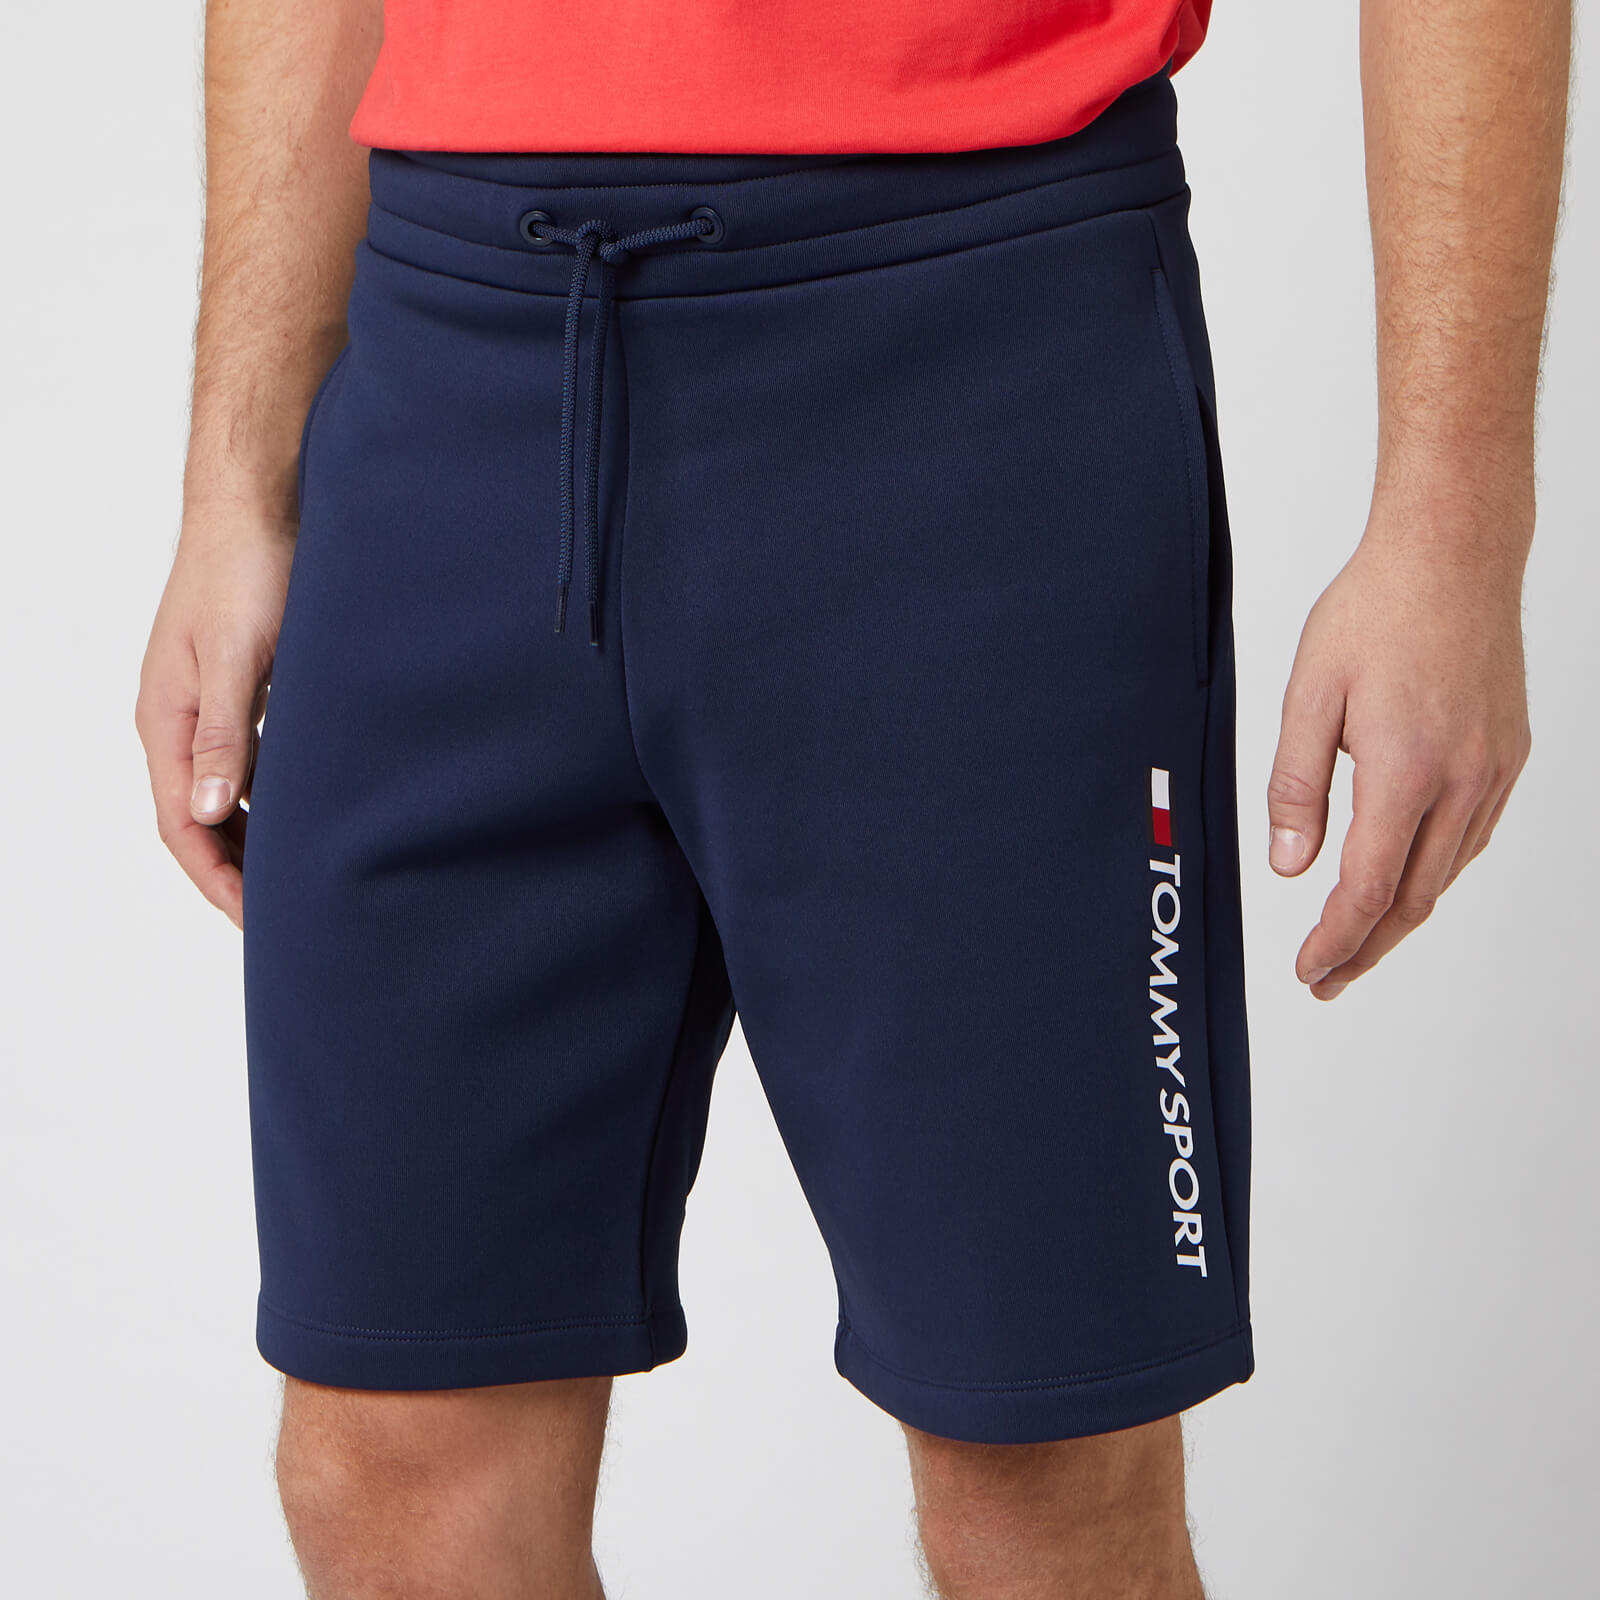 tommy sport clothing